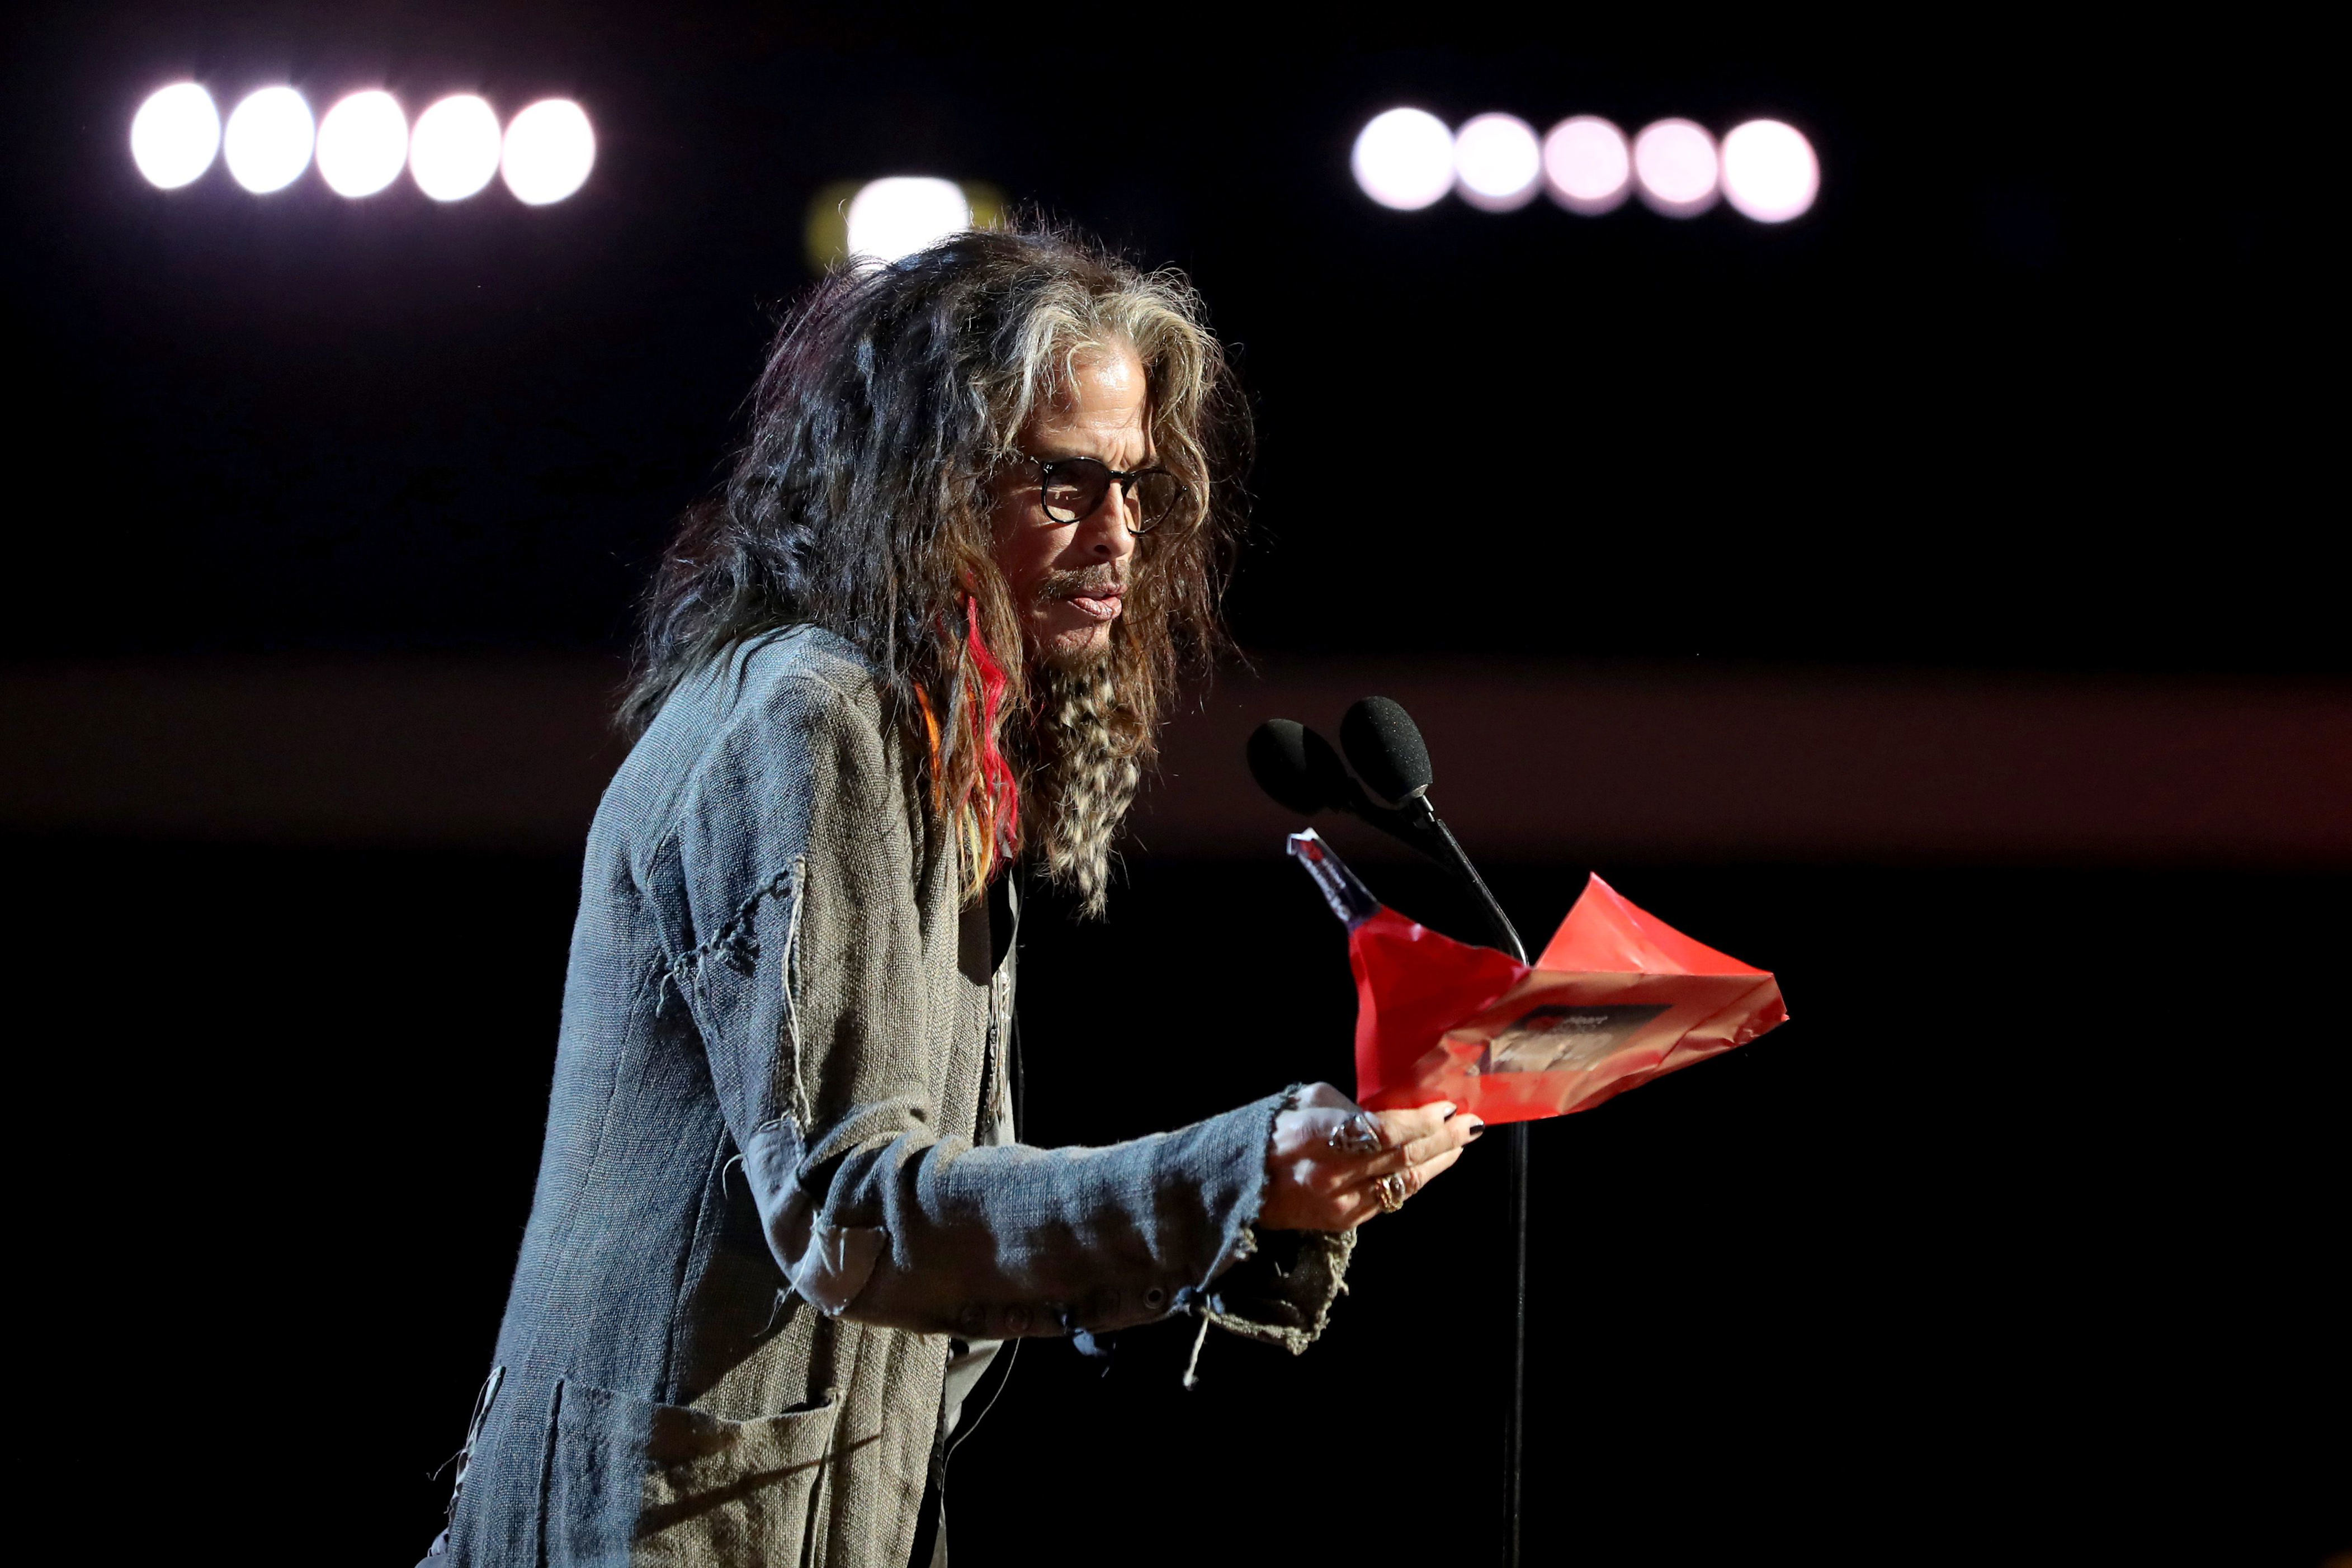 LOS ANGELES, CALIFORNIA - MARCH 14:  Steven Tyler presents on stage at the 2019 iHeartRadio Music Awards which broadcasted live on FOX at the Microsoft Theater on March 14, 2019 in Los Angeles, California. (Photo by Rich Fury/Getty Images for iHeartMedia)